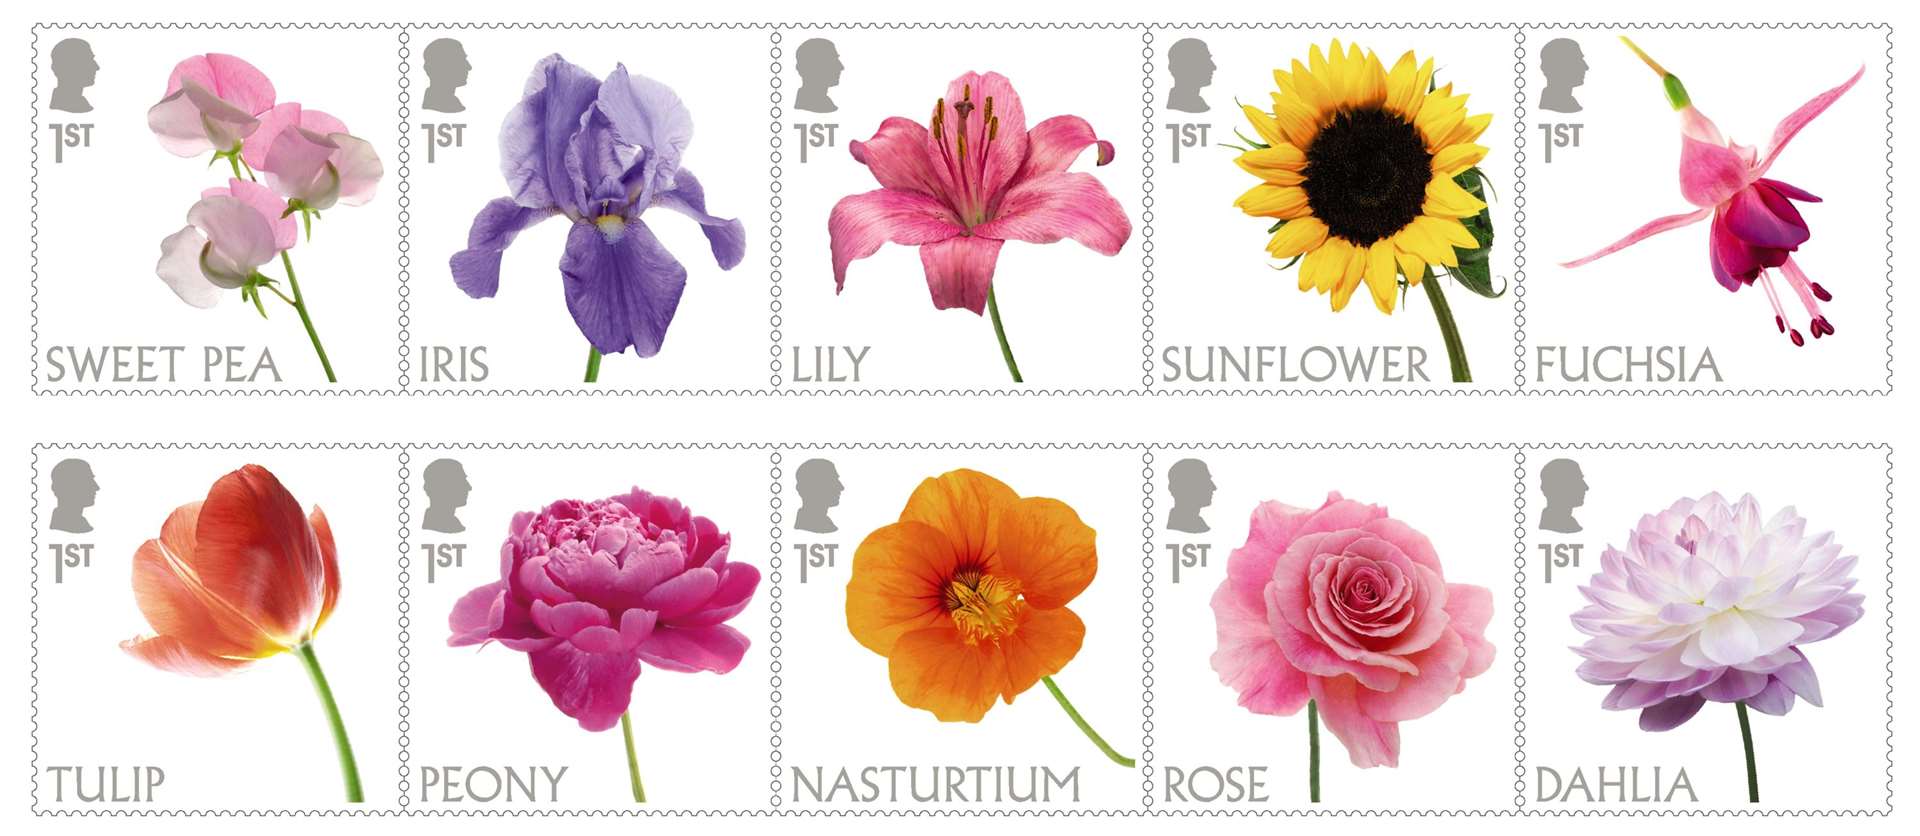 The 10-stamp set which showcases some of the most popular types of flowers grown in gardens across the UK (Royal Mail/PA)